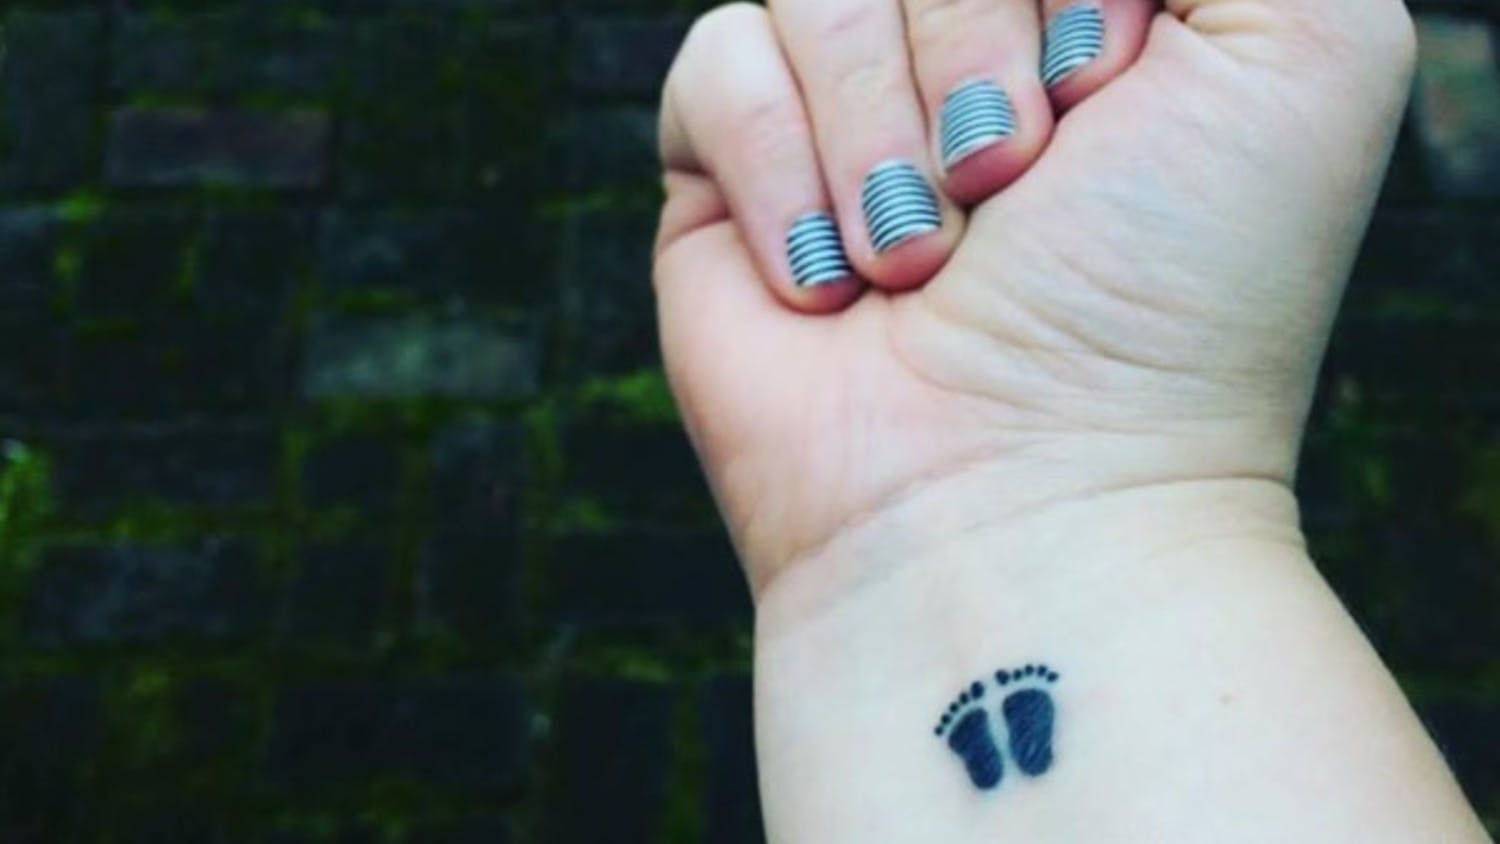 The tattoo that gives one woman hope in a time of loss - Netmums